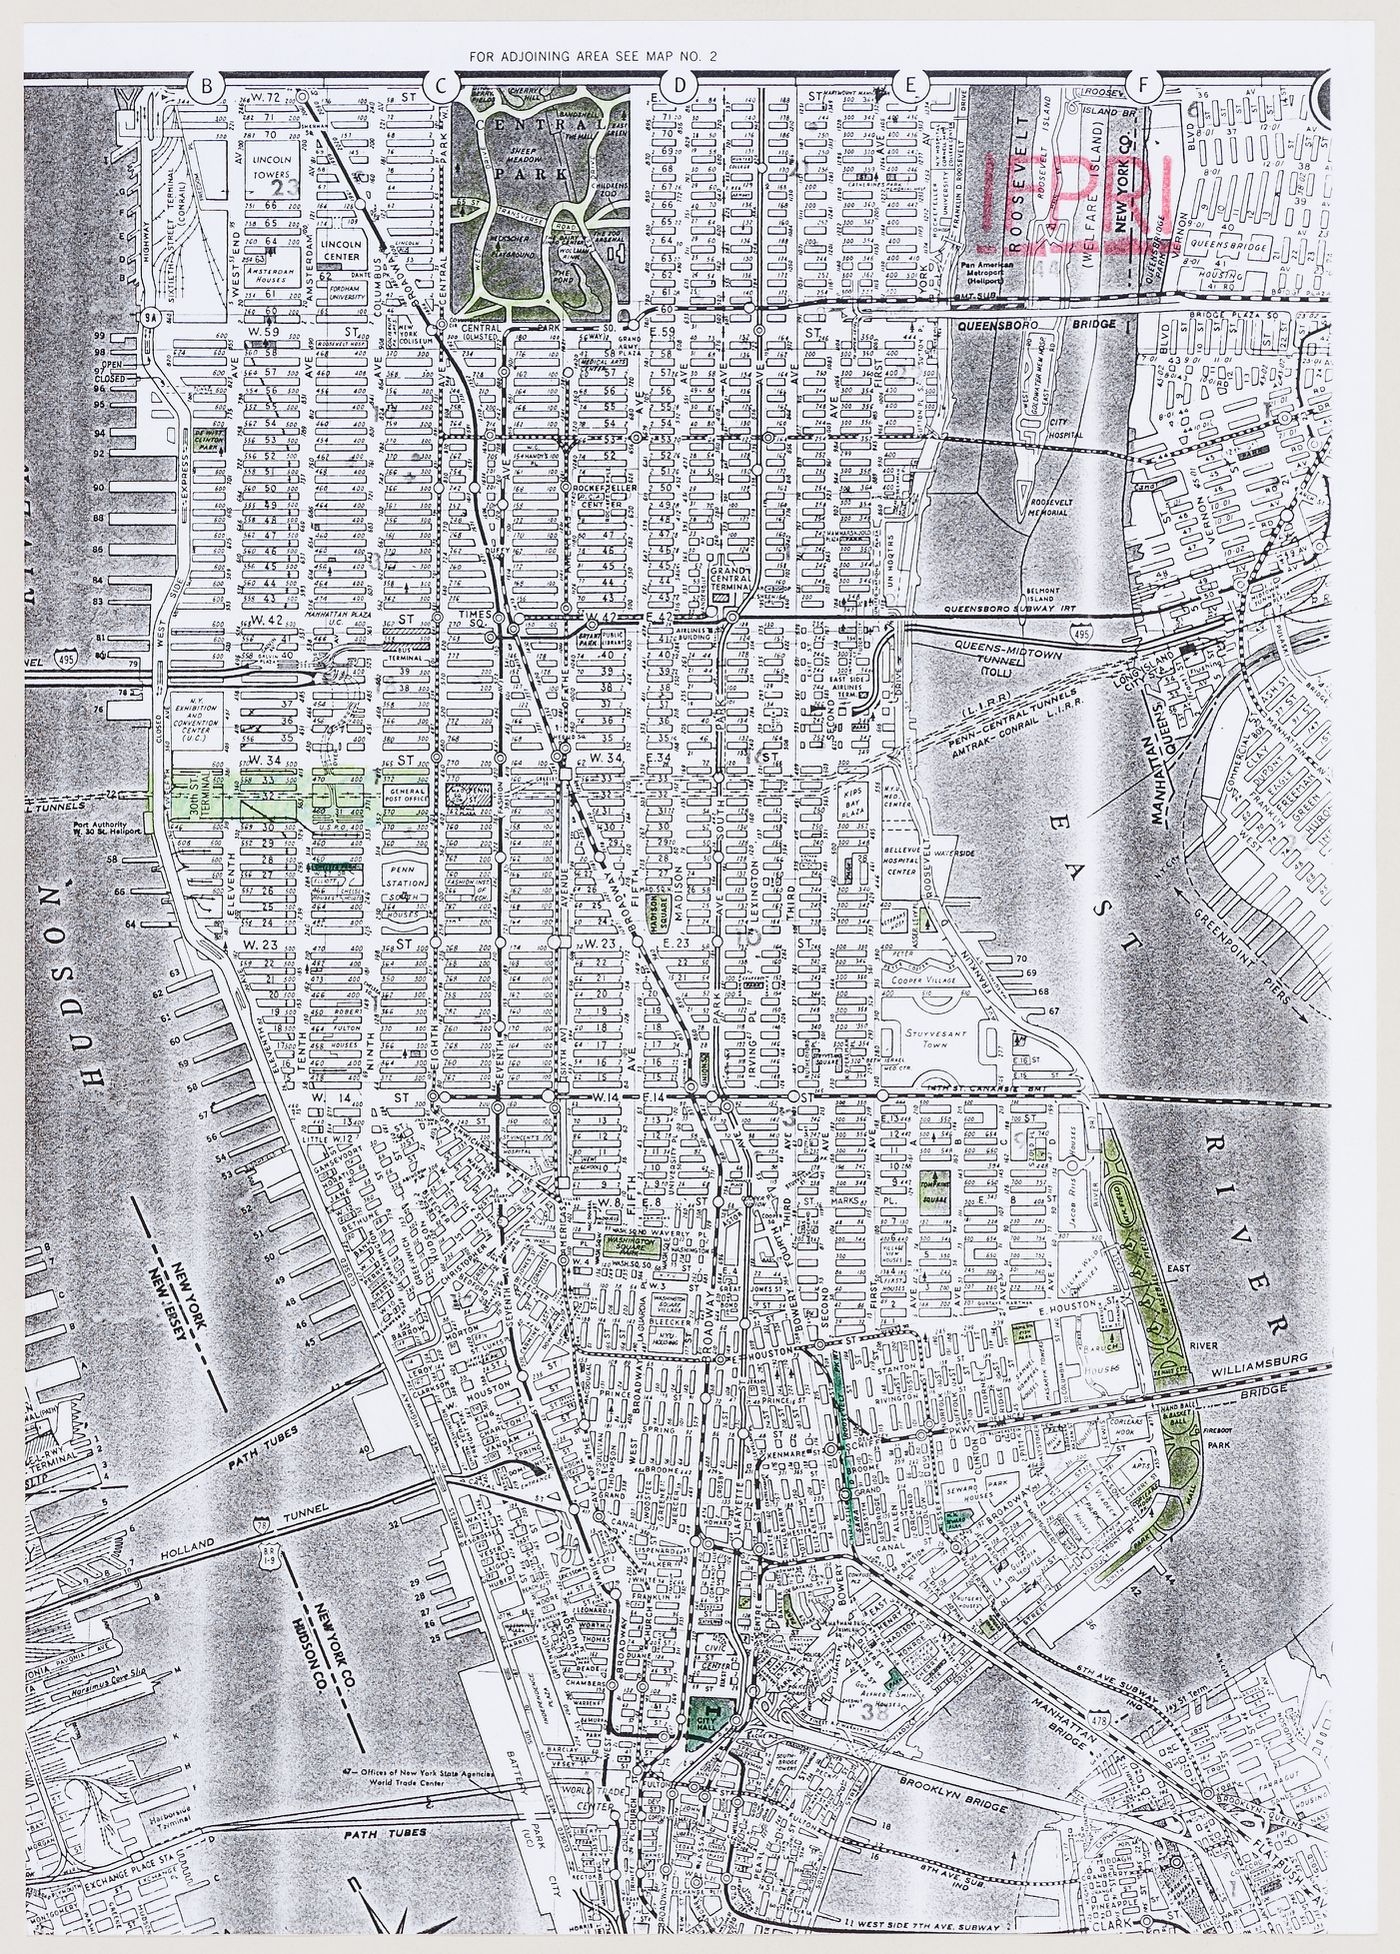 Map of Manhattan with site for the IFCCA Prize for the Design of Cities competition and other landmarks highlighted (document from the IFPRI project records)